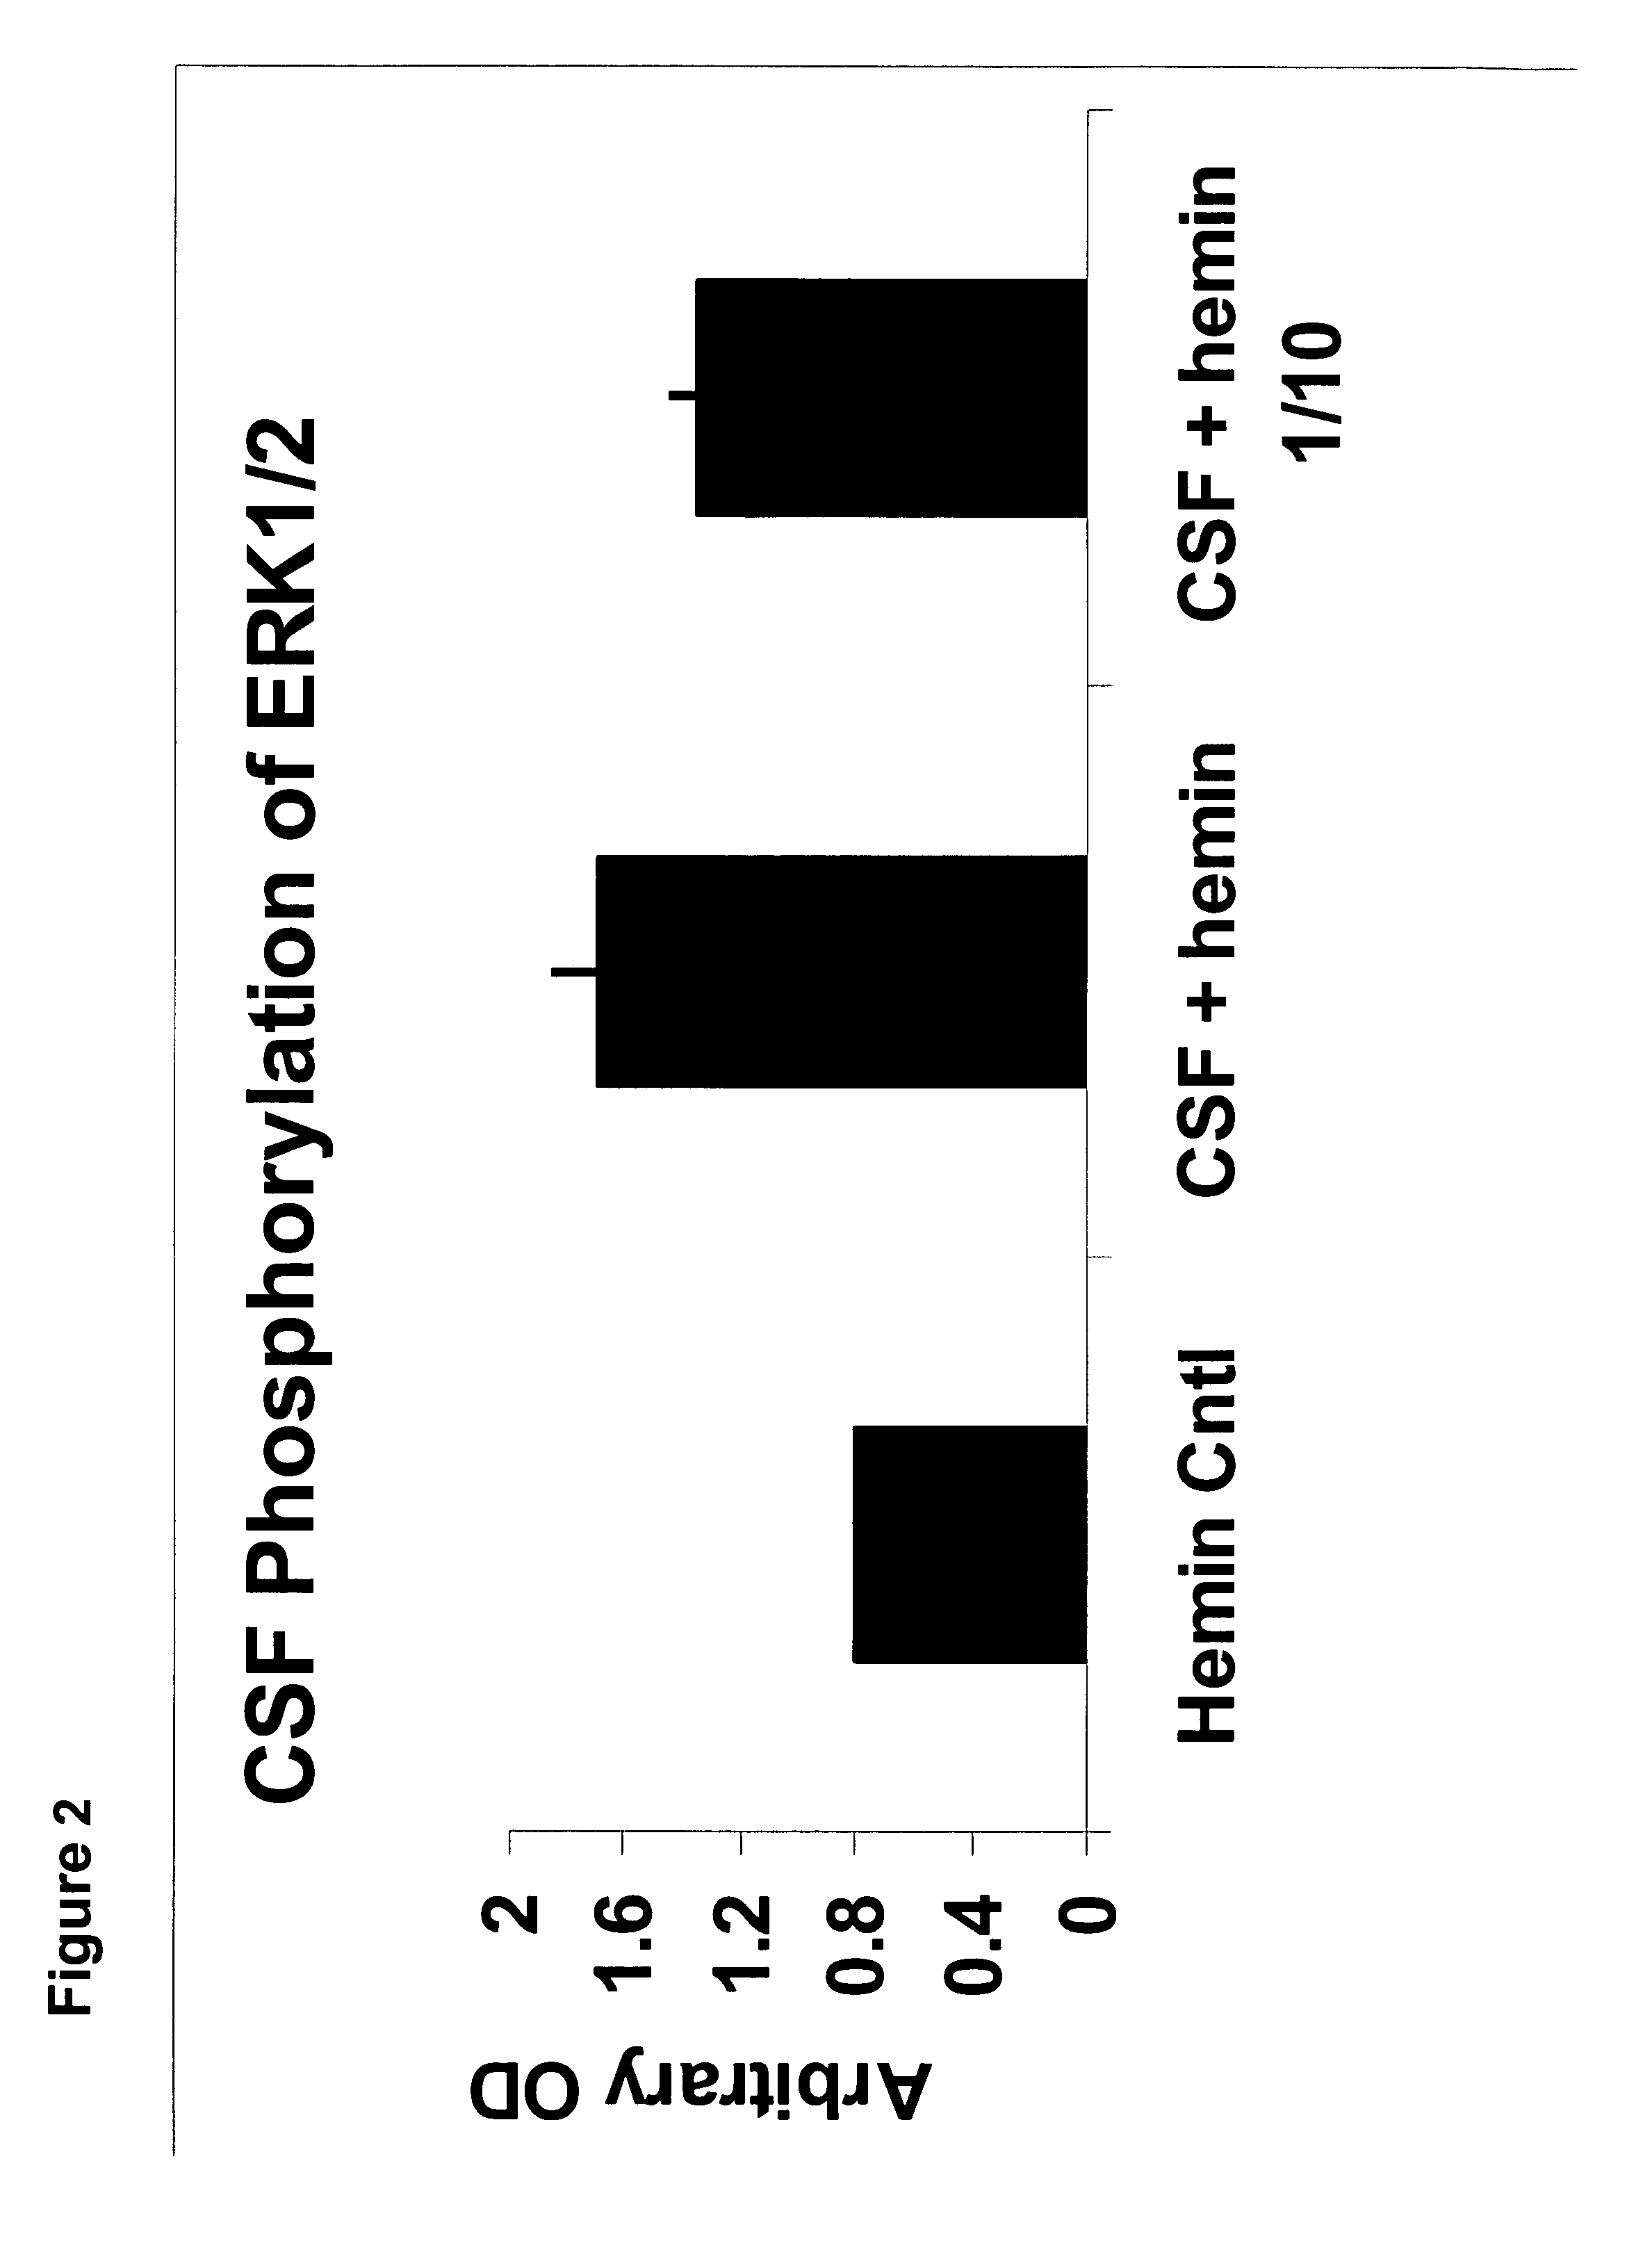 Method of detecting or diagnosing of a neurodegenerative disease or condition